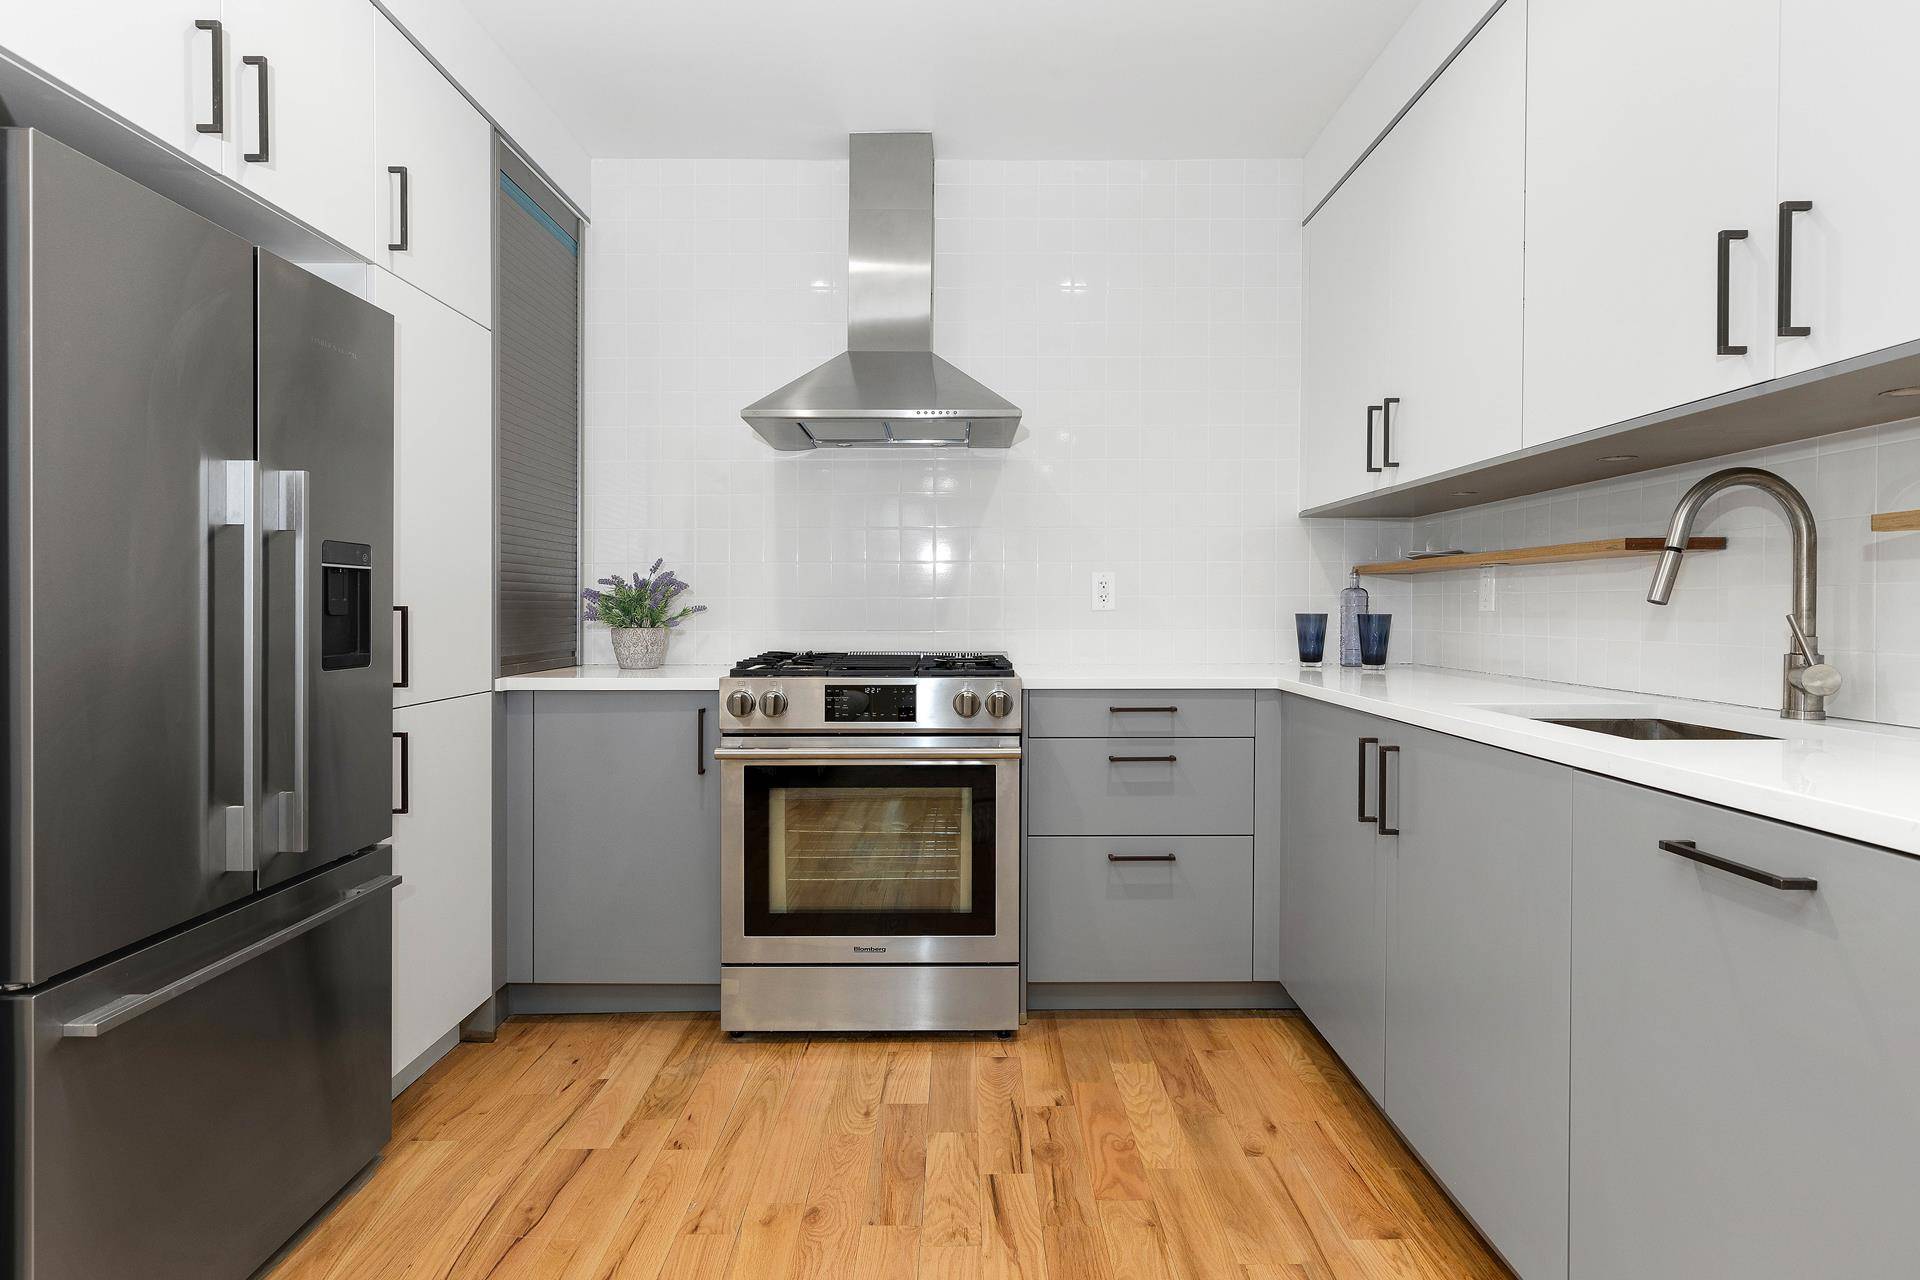 Open House by Appointment ONLY Introducing 803 Quincy Street, a brand new, eight unit boutique condominium comprised of one three bedroom 1BR 3BR residences in the historic Stuyvesant Heights section ...